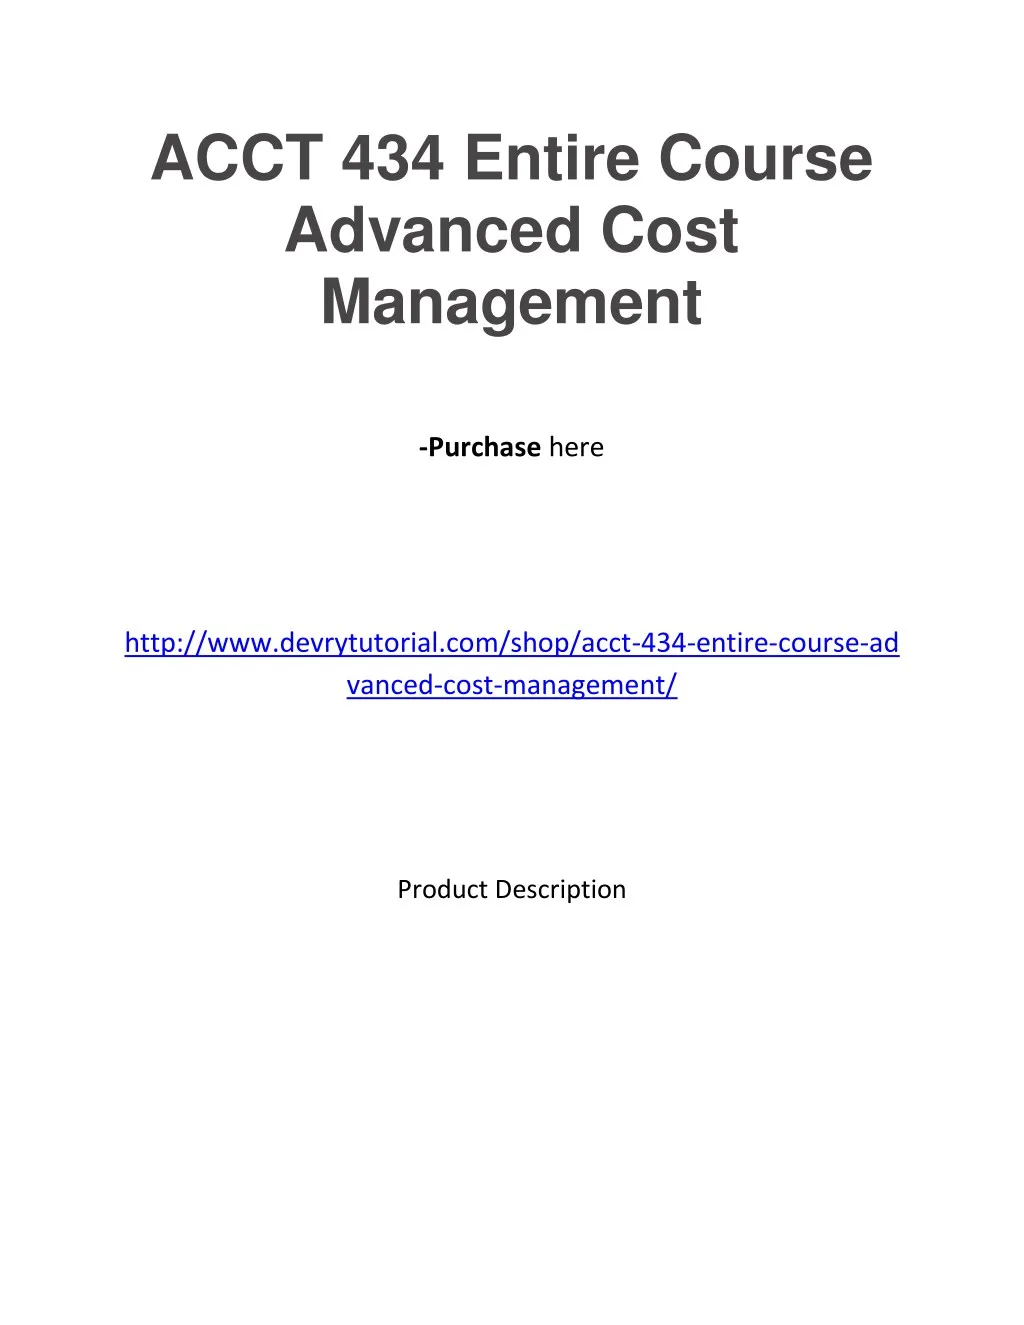 acct 434 entire course advanced cost management